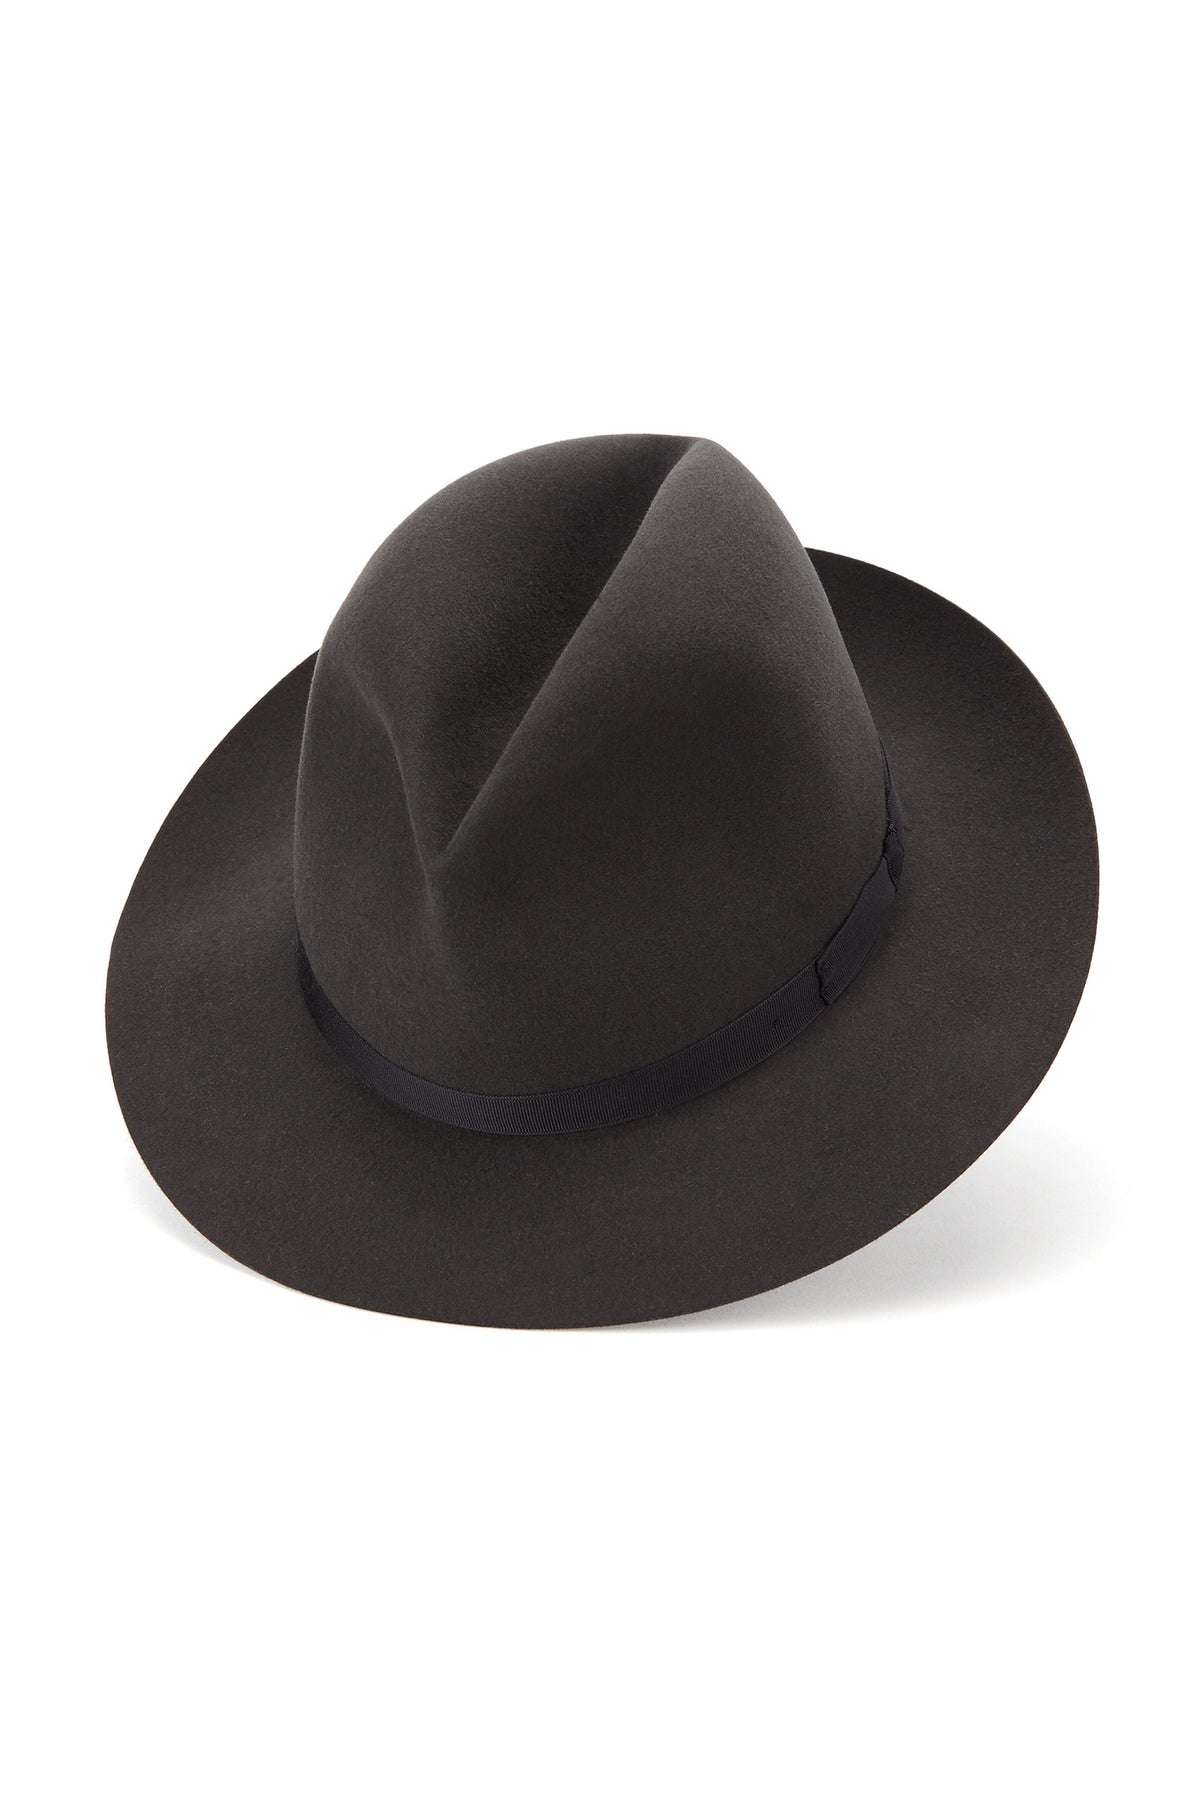 Voyager Rollable Trilby - Lock & Co. Hats for Men & Women